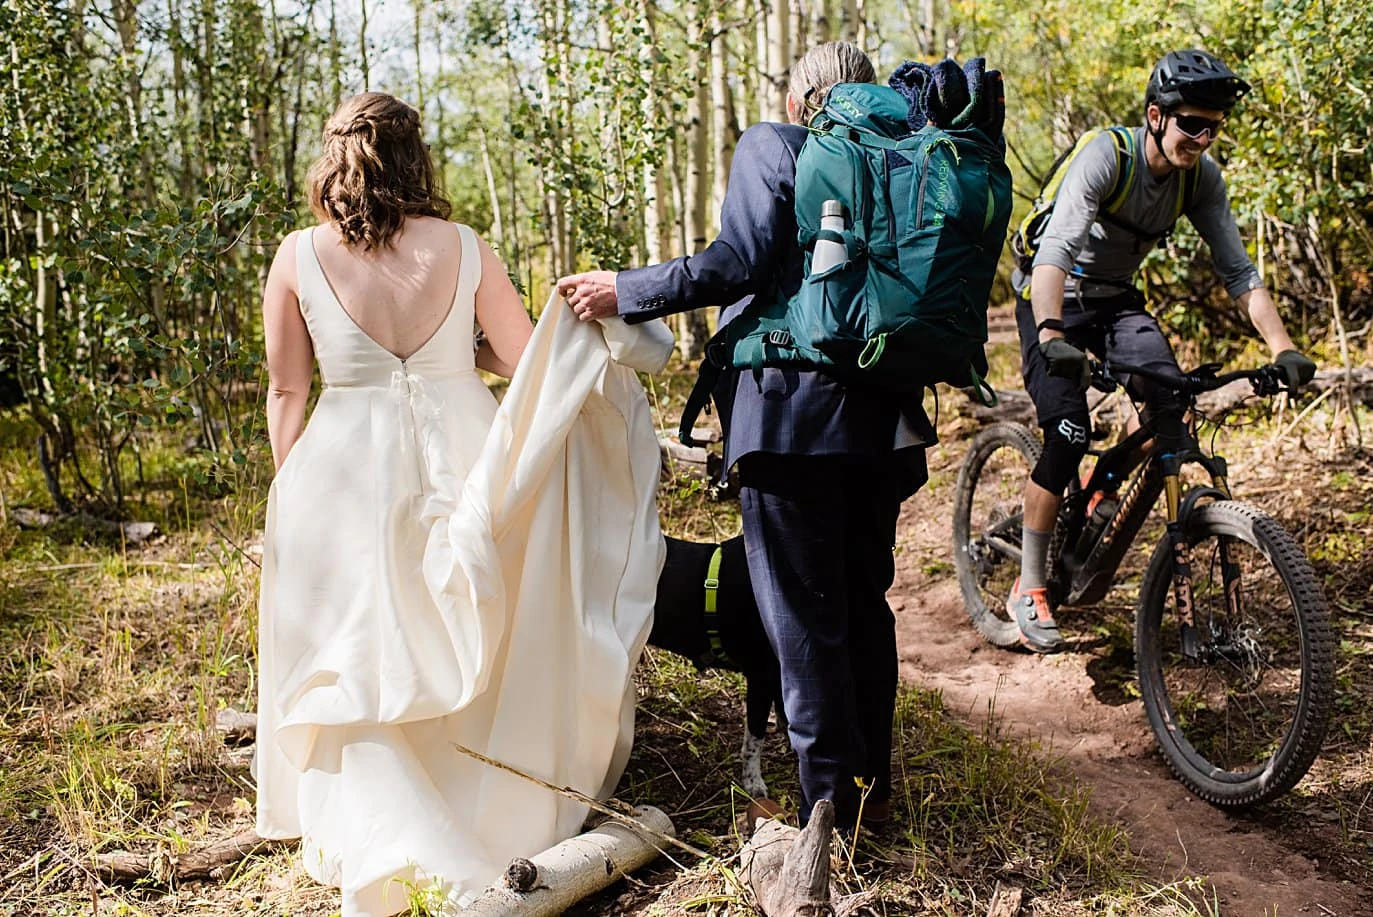 bride and groom hike past mountain biker on way to ceremony spot in Crested Butte for private elopement by Aspen wedding photographer Jennie Crate